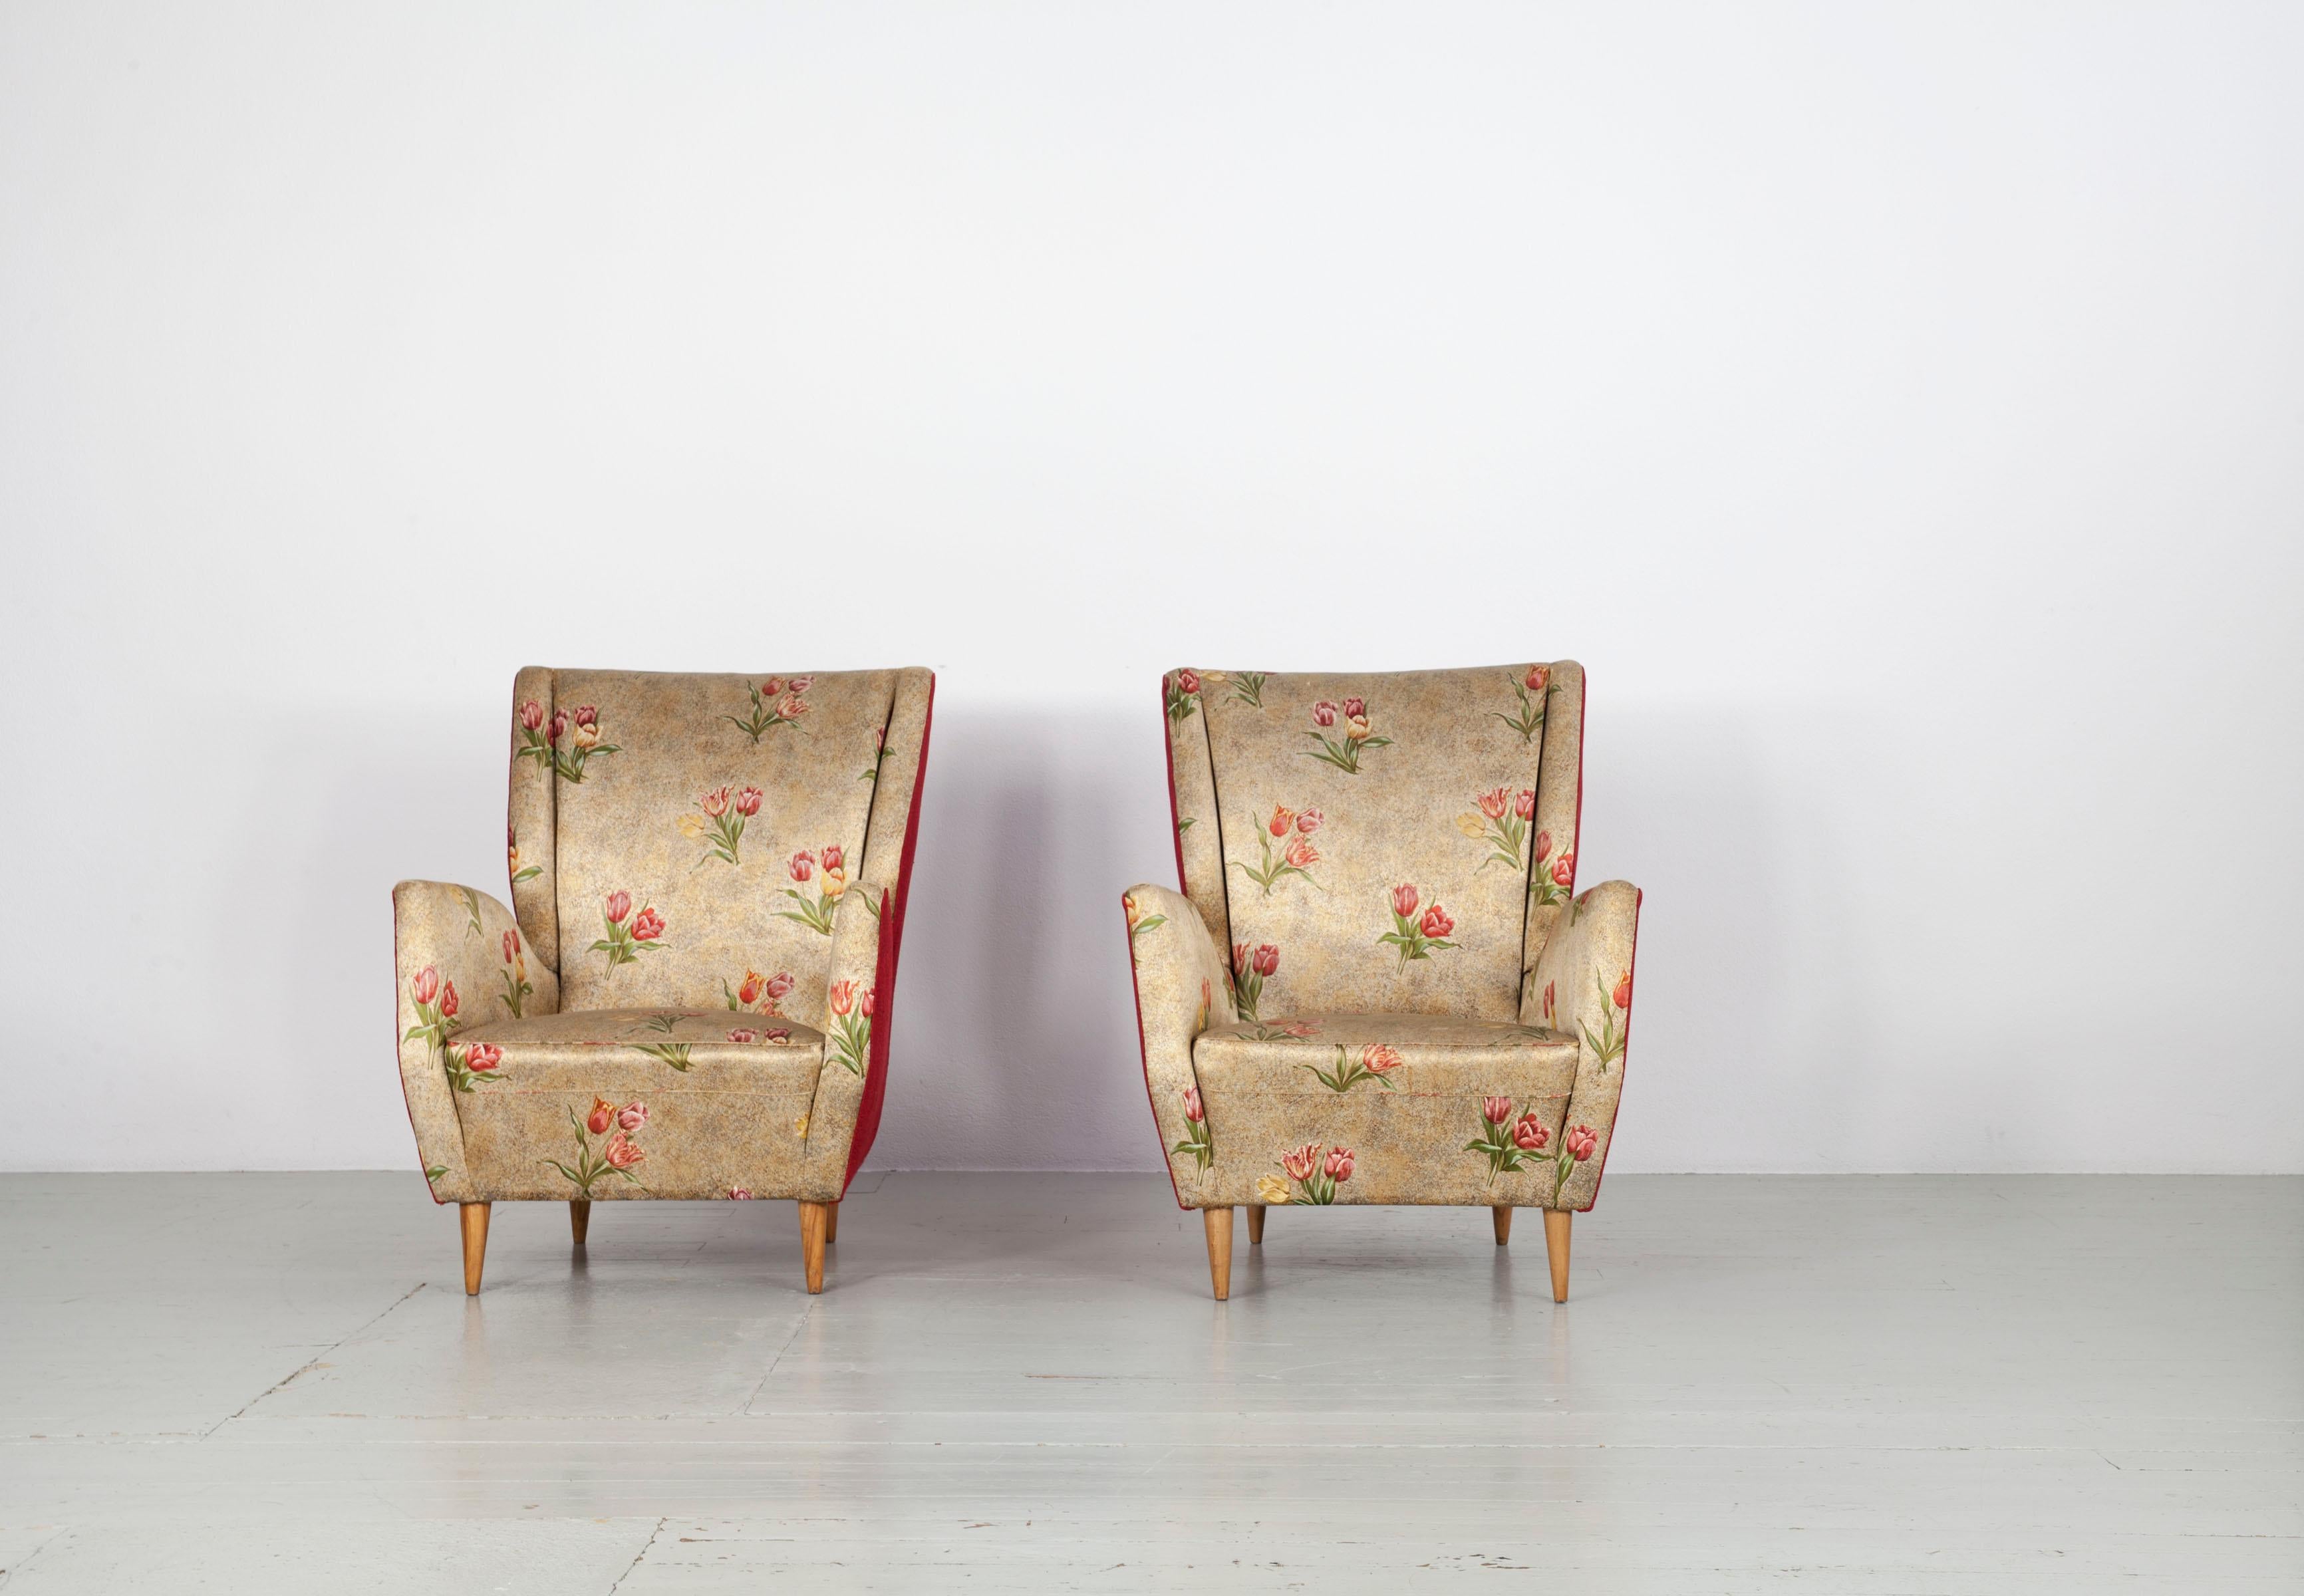 Italian 1950s pair of armchairs with conical wooden legs and original fabric upholstery. The chairs are in good authentic vintage condition. The foam is just a little worn through.